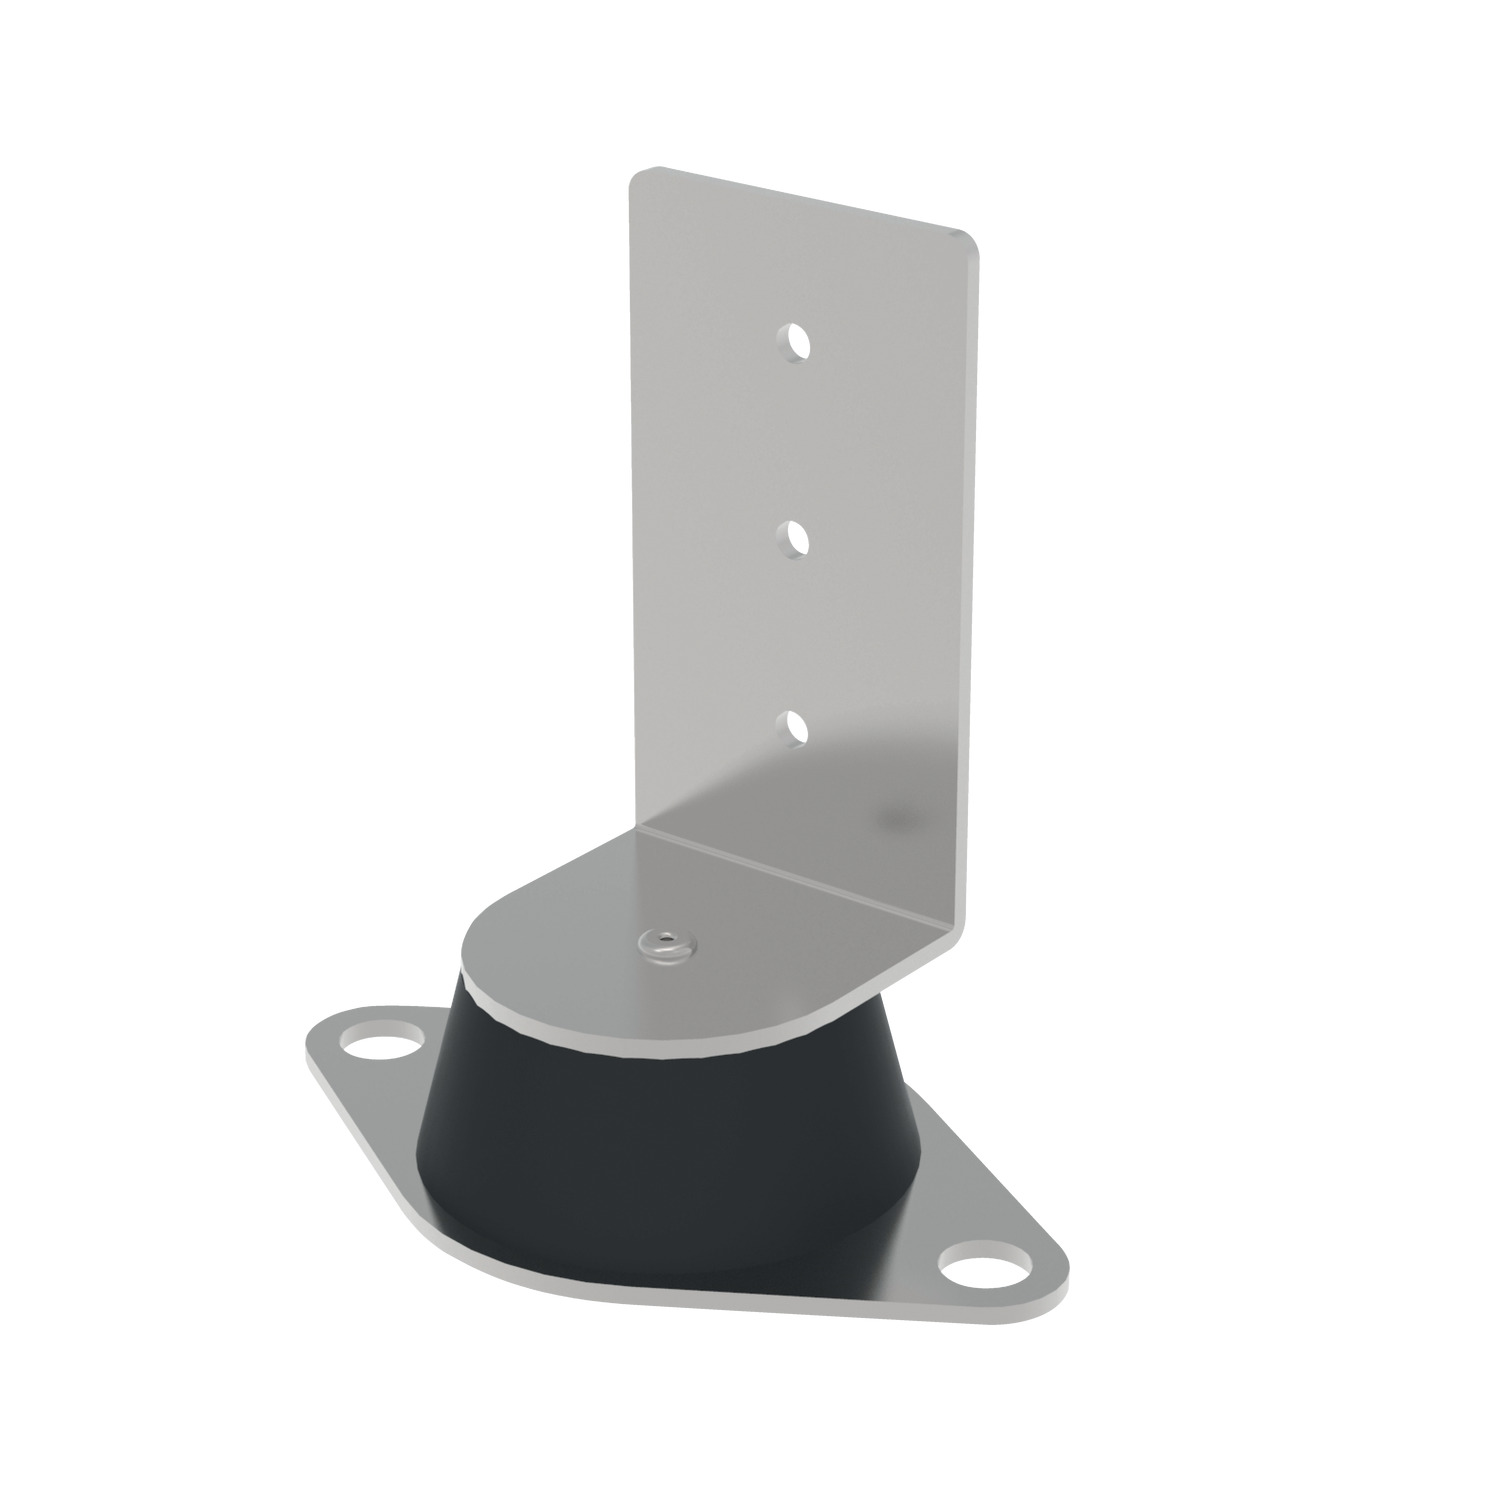 P2556 Acoustic Wall Damper right angle fixing